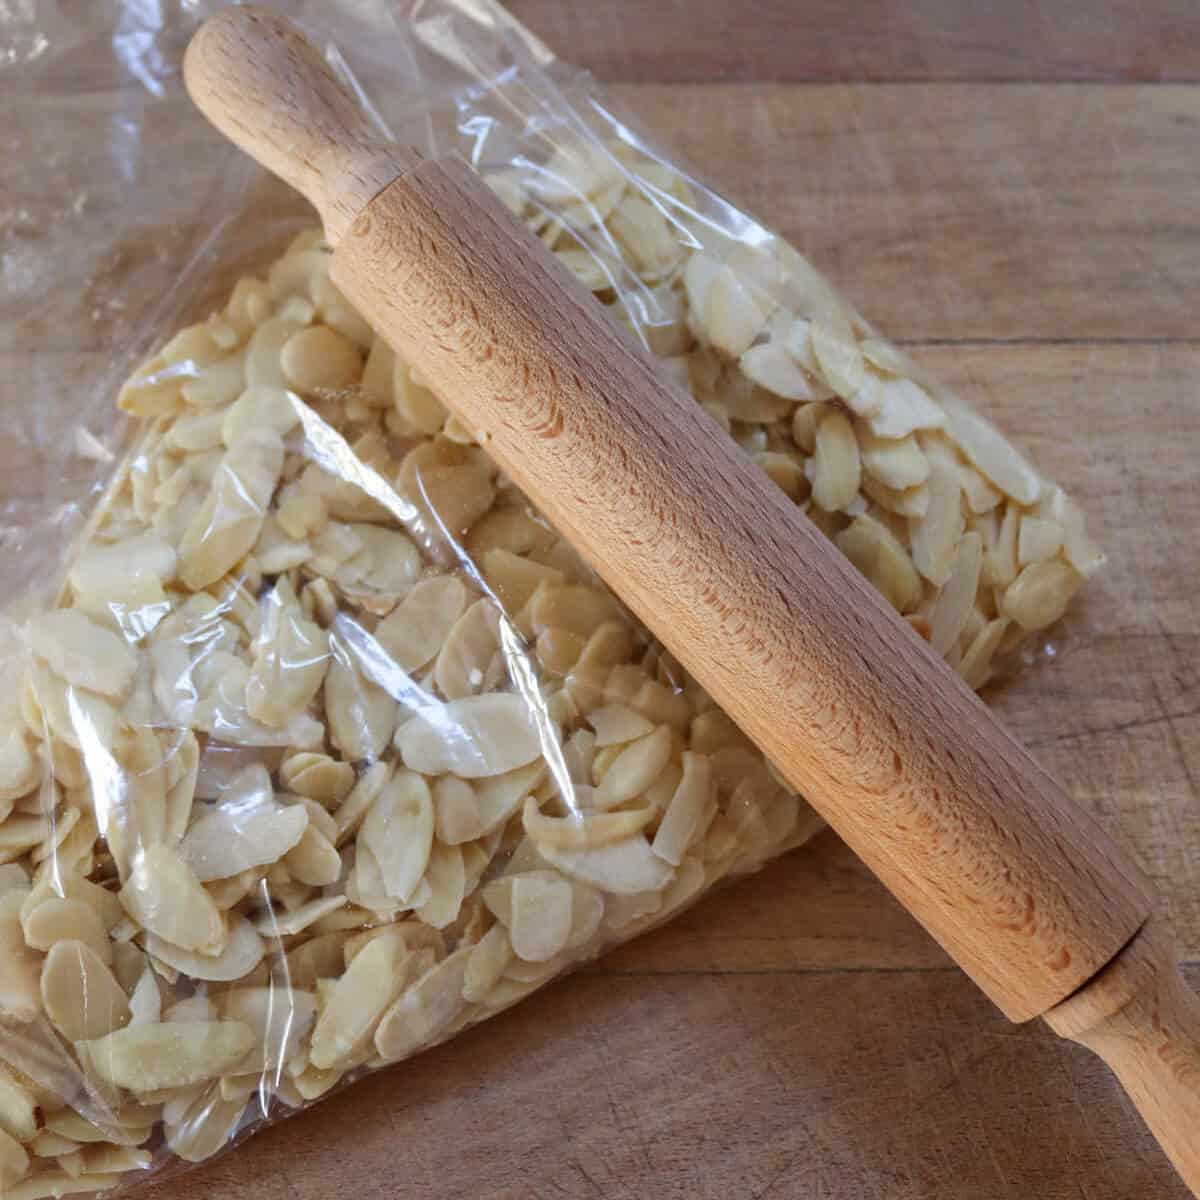 flaked almonds in a ziplock bag and a rolling pin which will be used to crush them. 